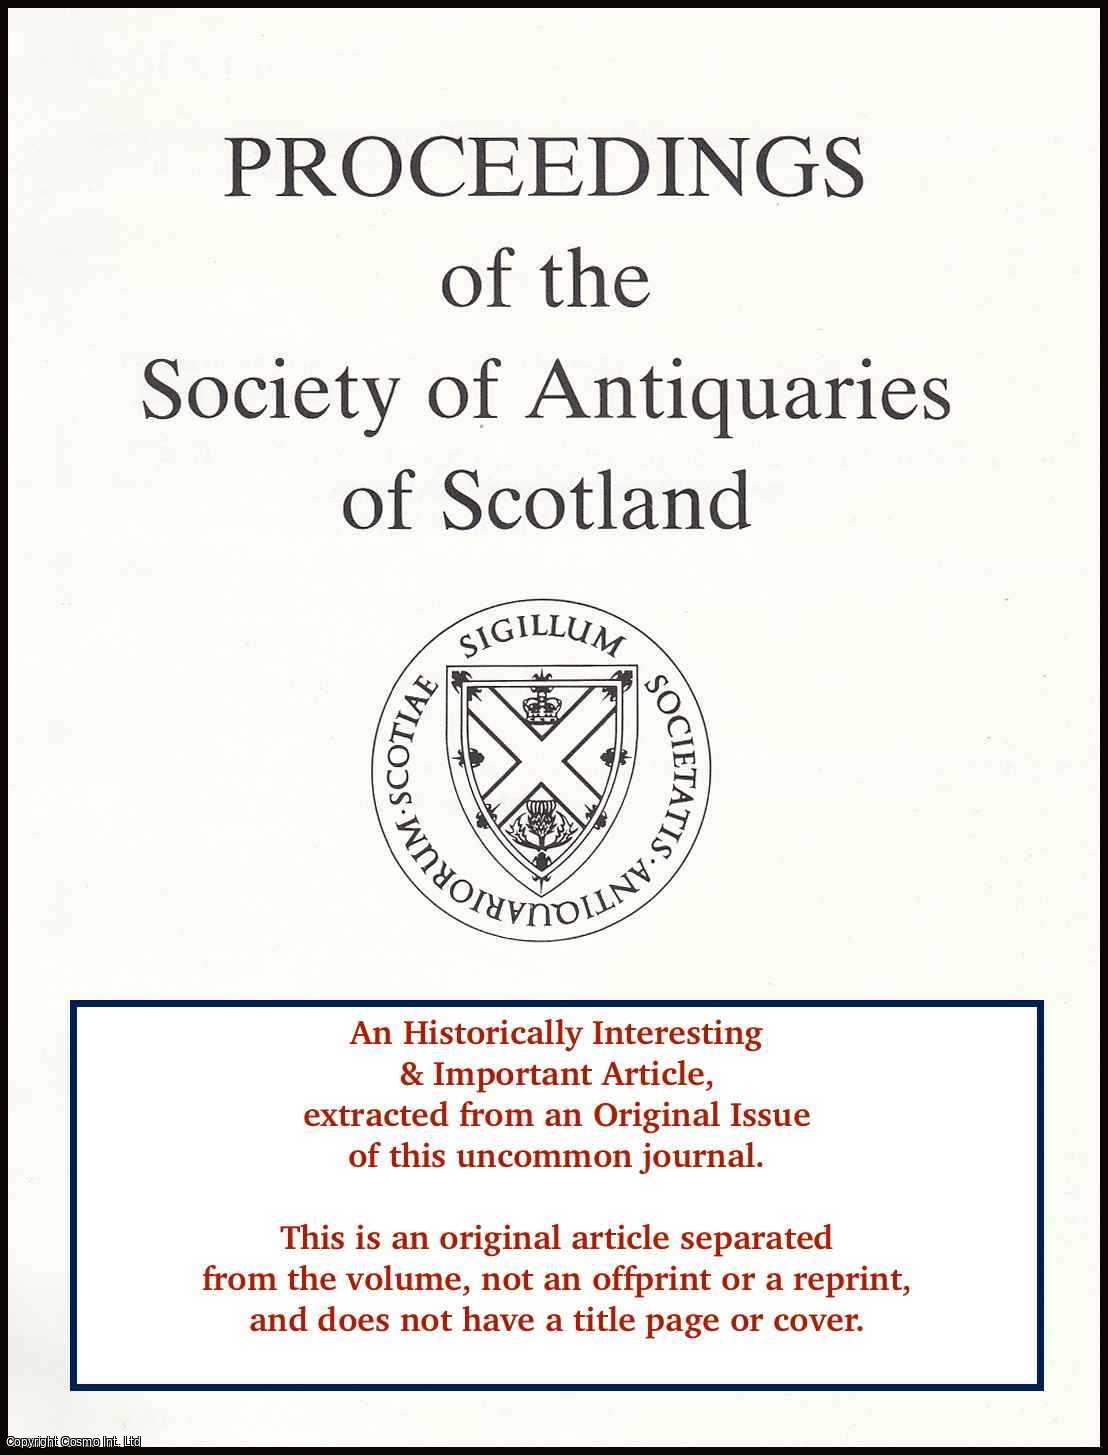 J.N. Ritchie & Others - Excavations at Machrins, Colonsay.